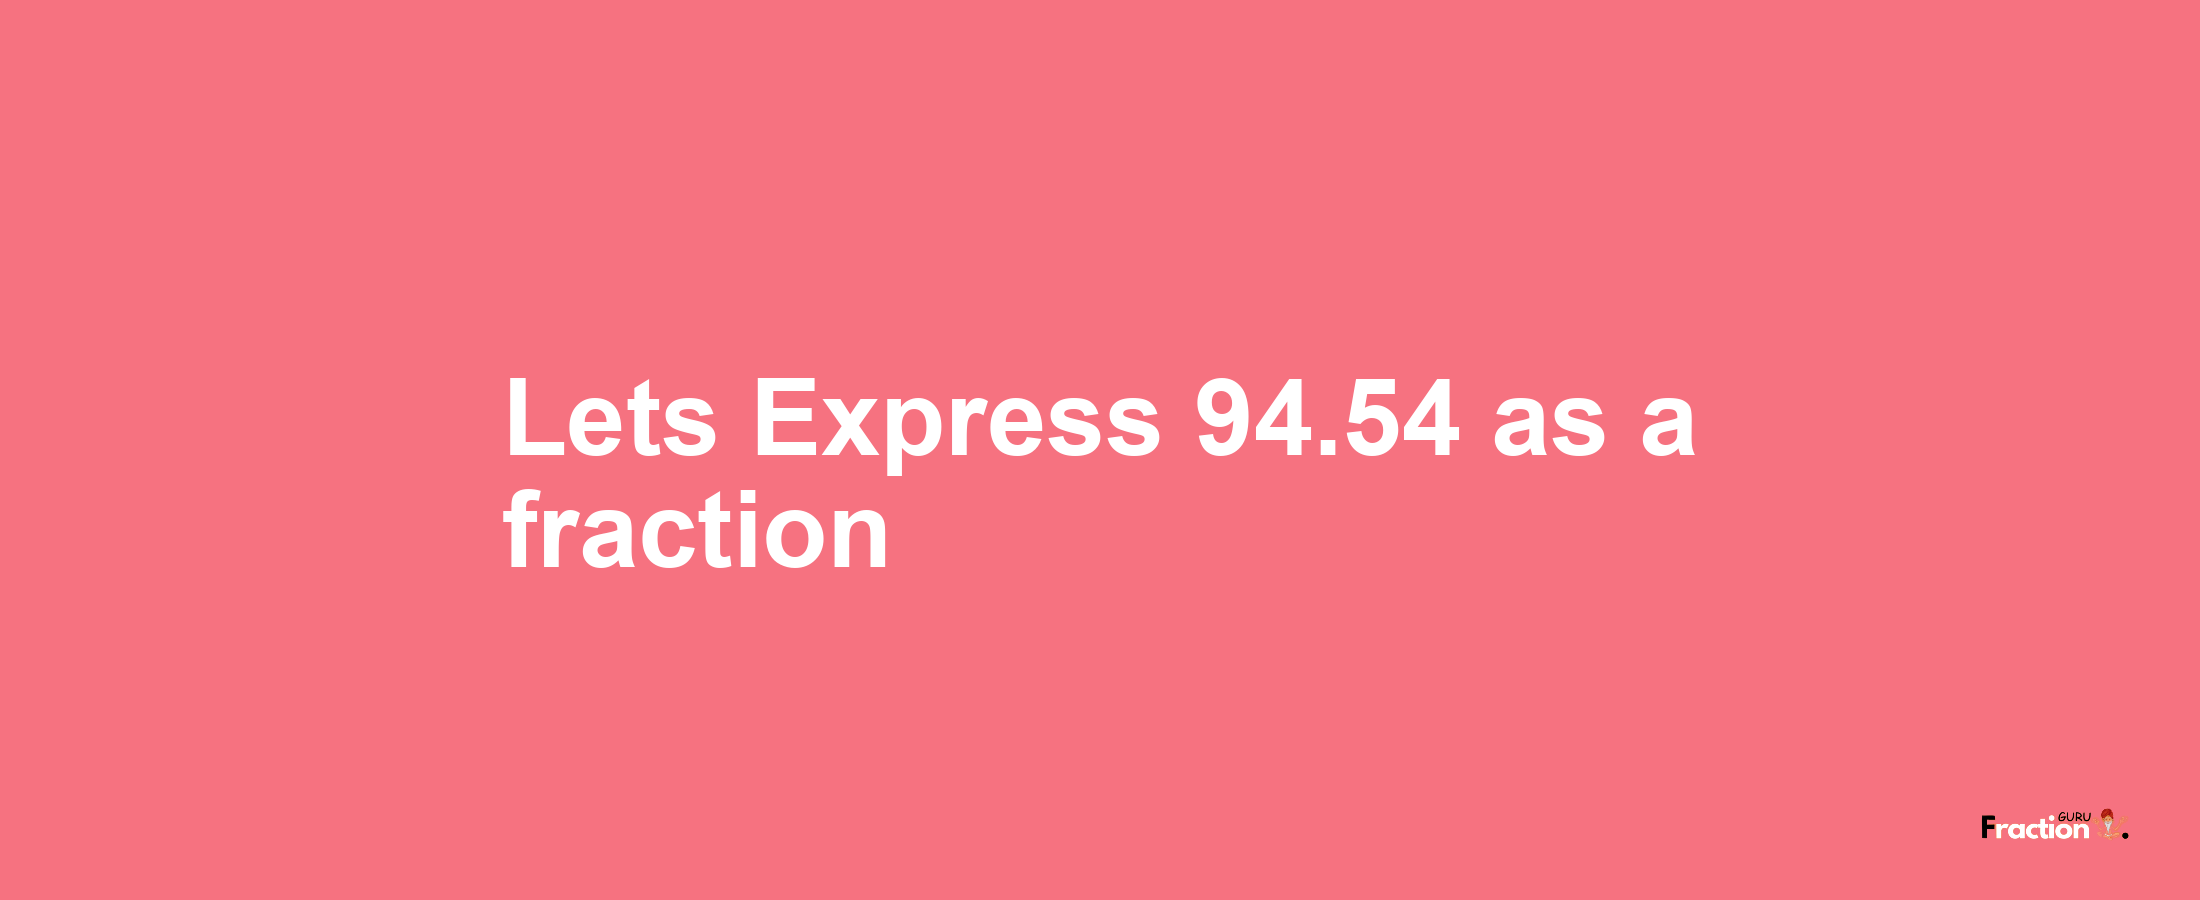 Lets Express 94.54 as afraction